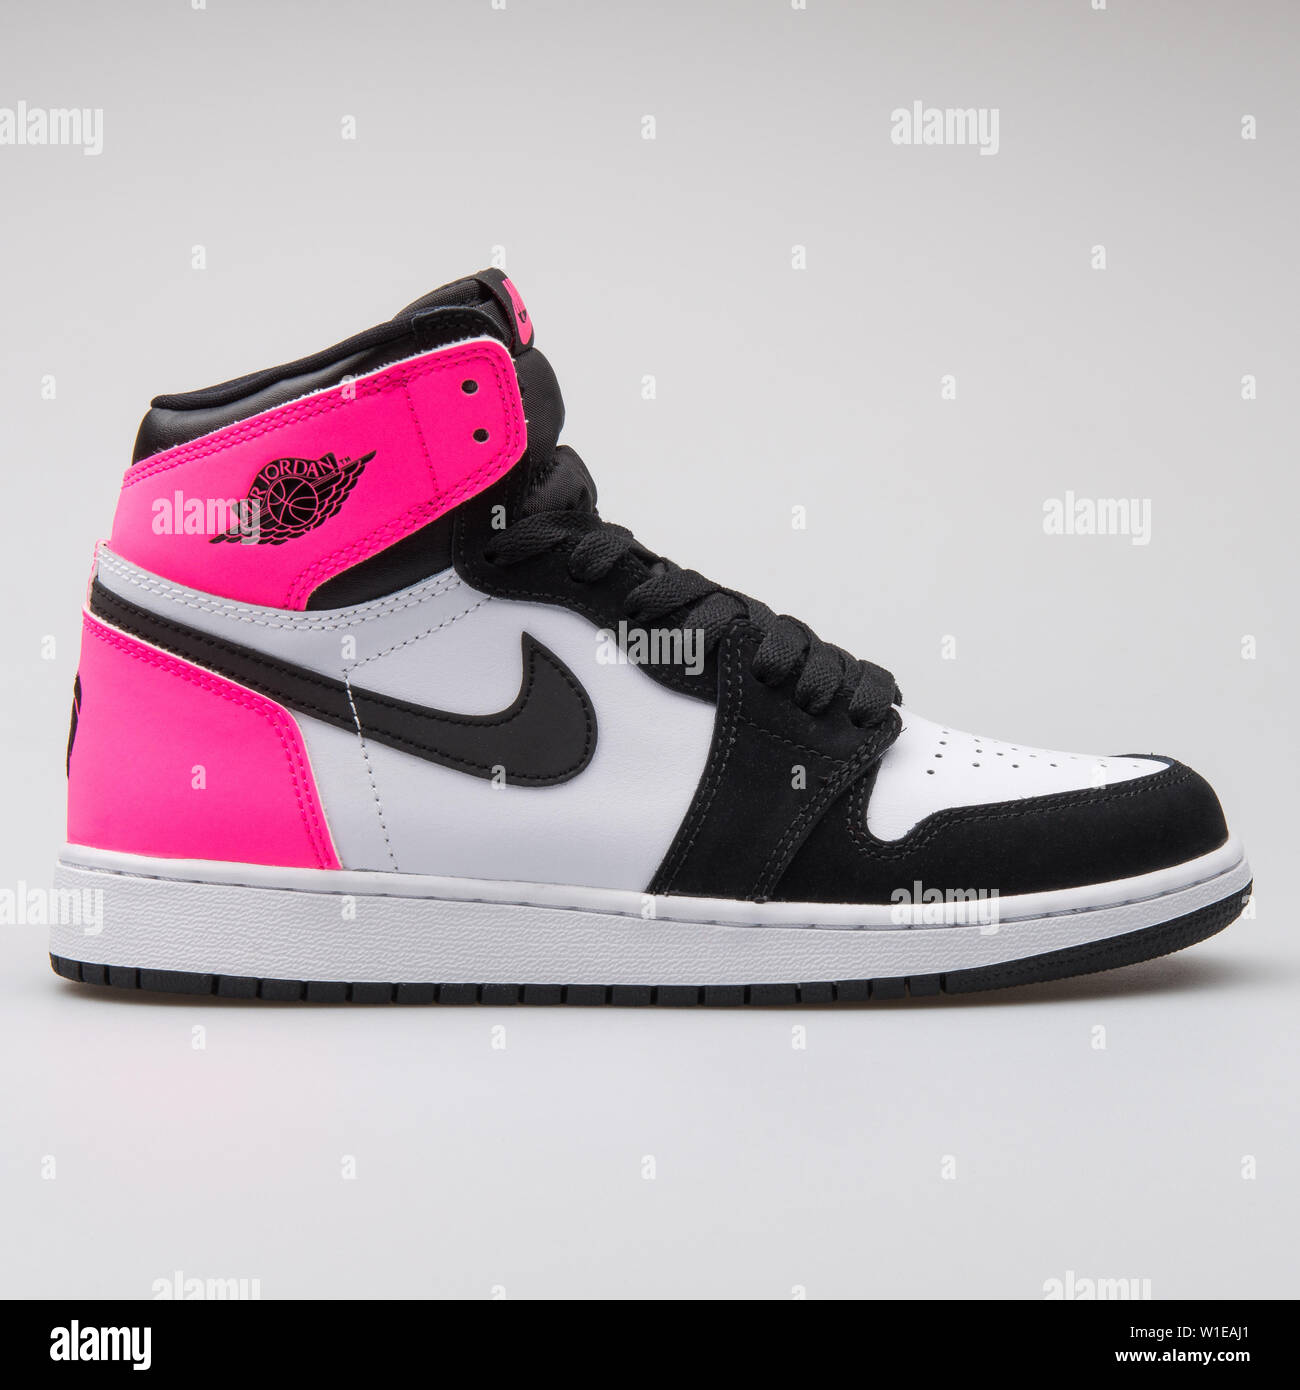 VIENNA, AUSTRIA - JUNE 14, 2017: Nike Air Jordan 1 Retro high OG GG white,  pink and black sneaker isolated on grey background Stock Photo - Alamy